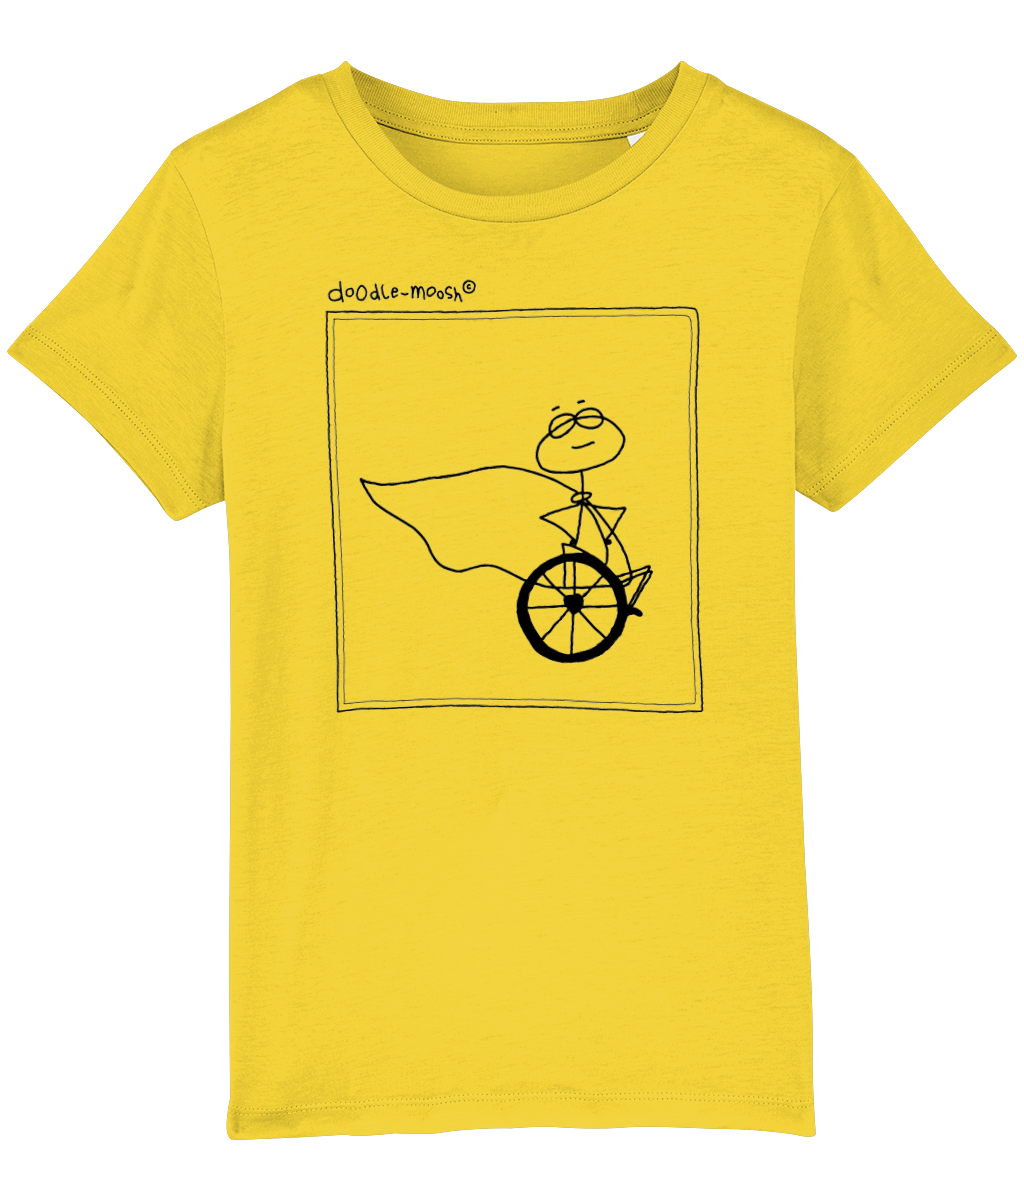 superpower t-shirt, yellow with black